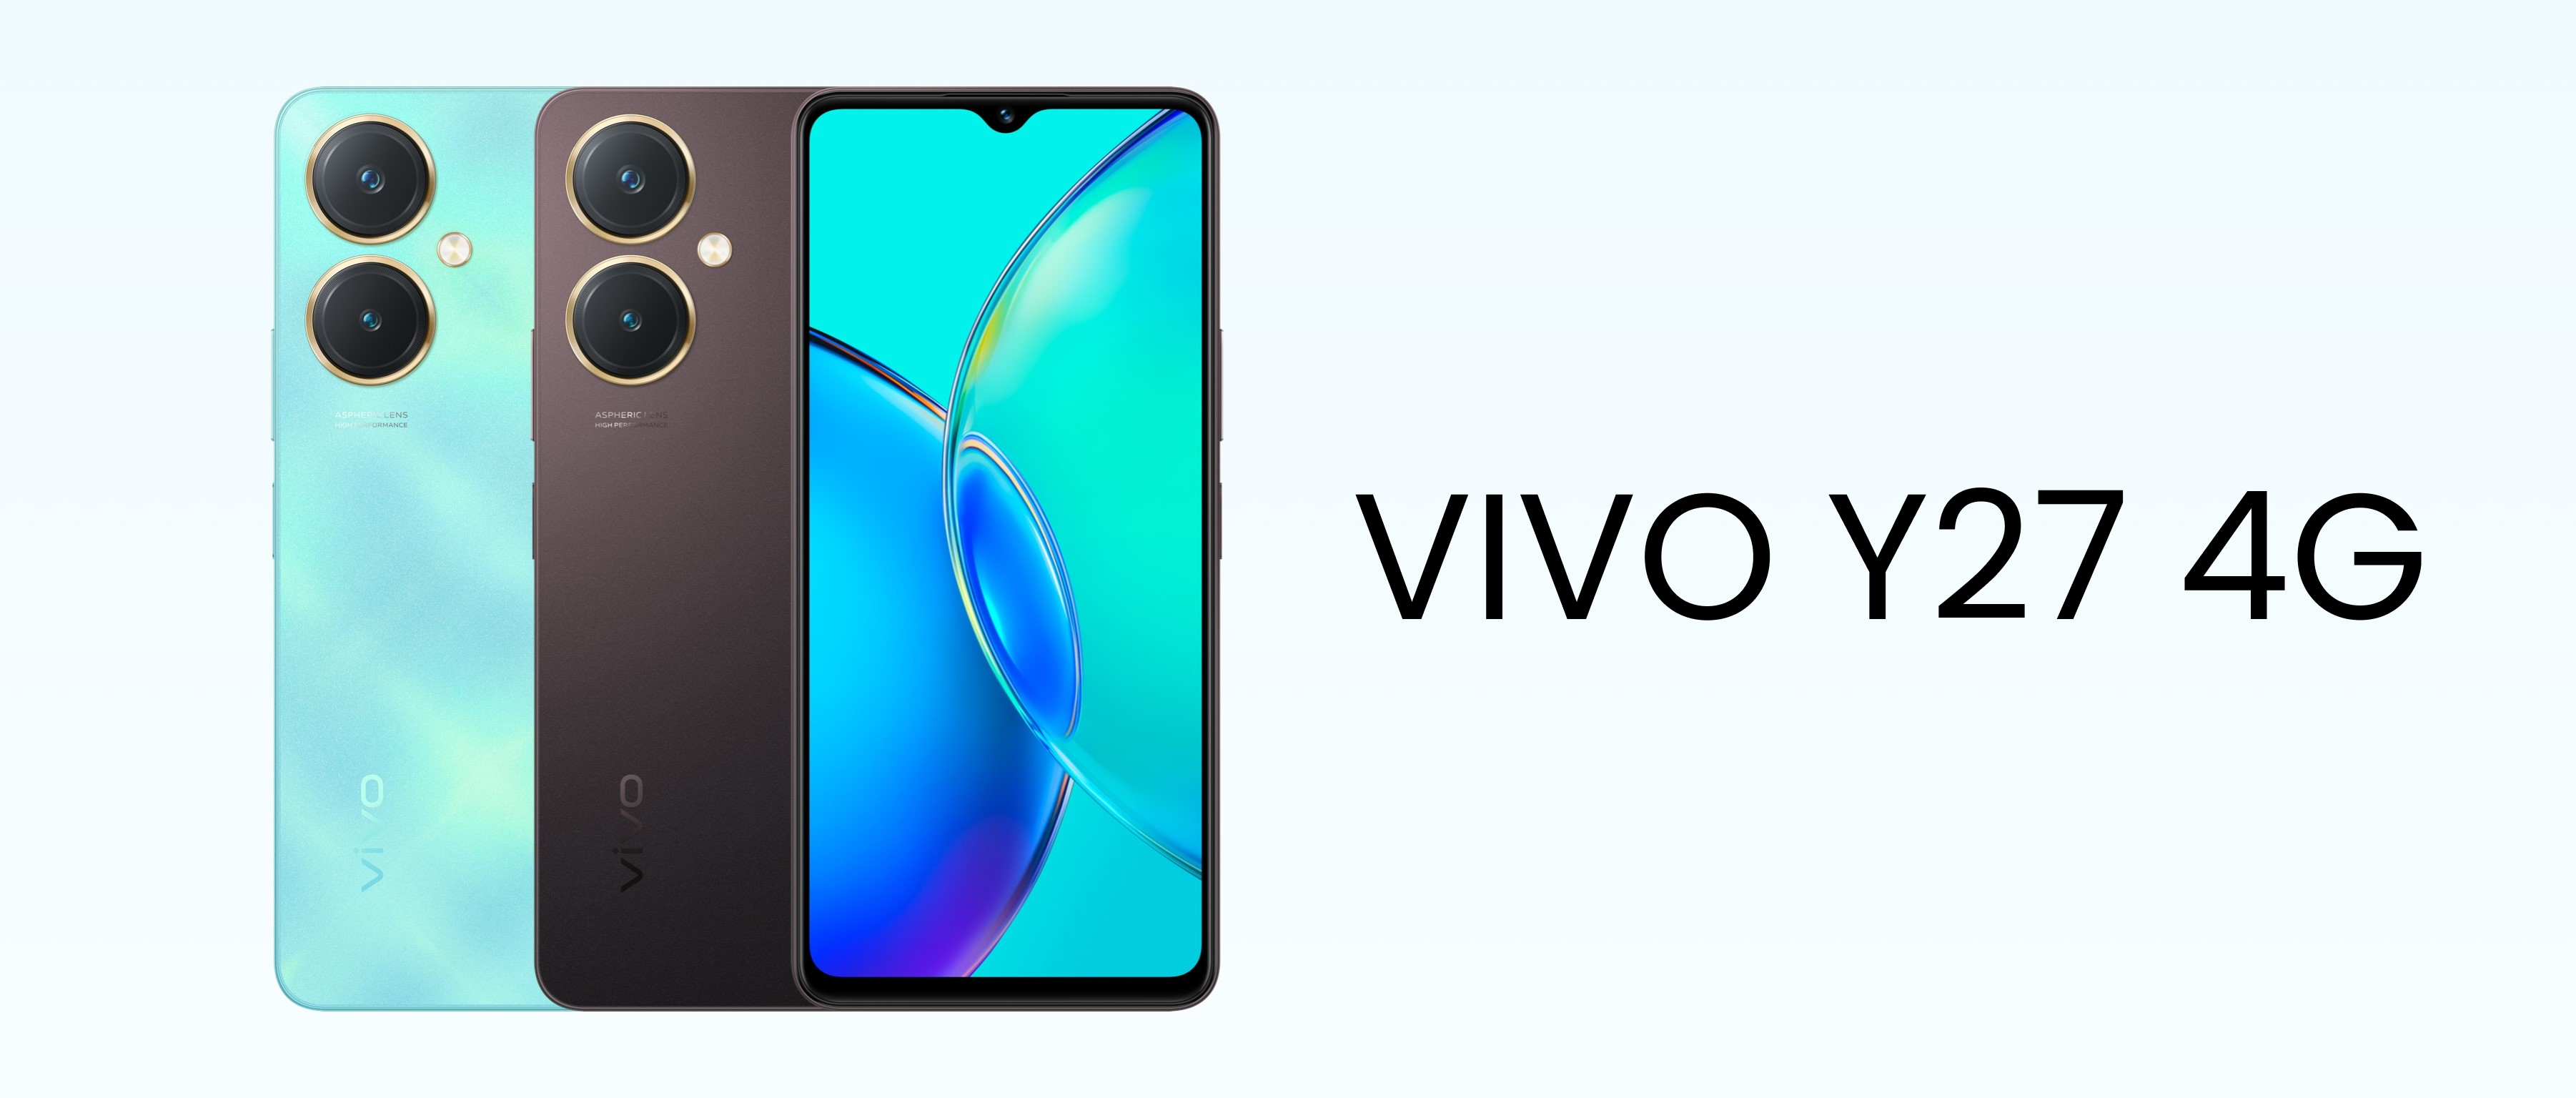 Vivo Y27 4G in Nepal: Budget smartphone with a beautiful design